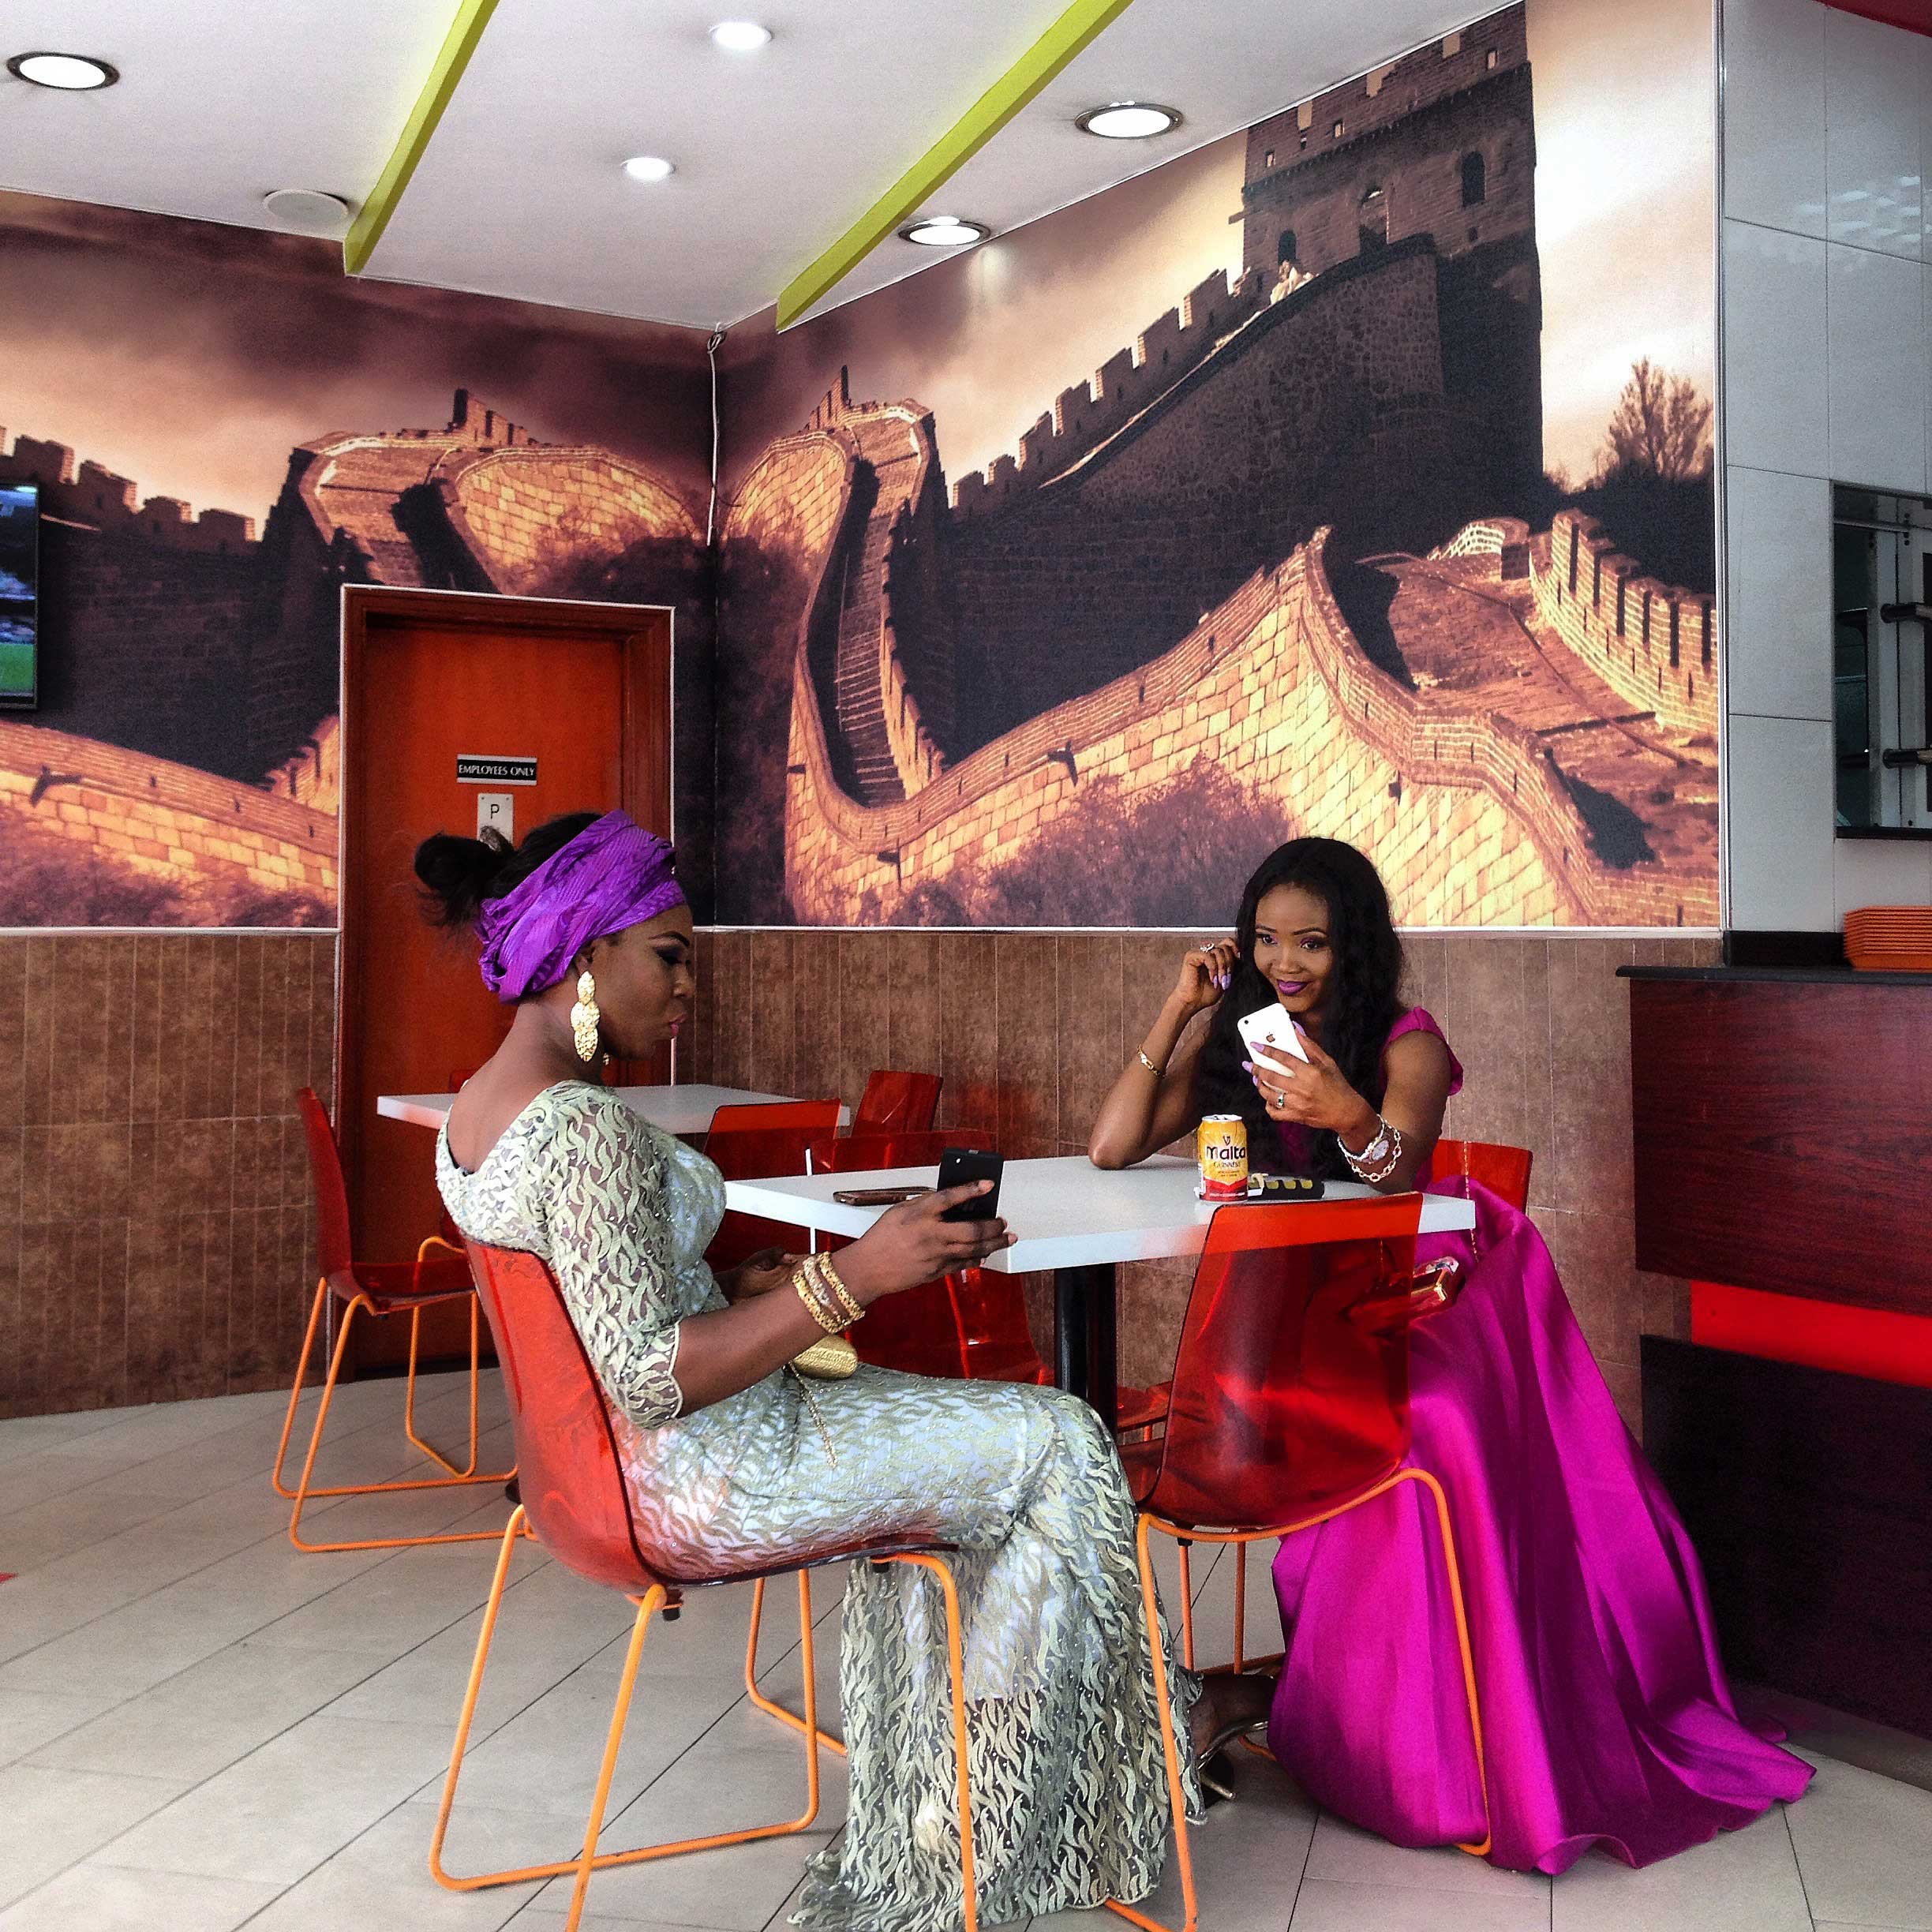 Two women and their cell phones in Lagos, Nigeria. @andrewesiebo (Andrew Esiebo (@andrewesiebo))